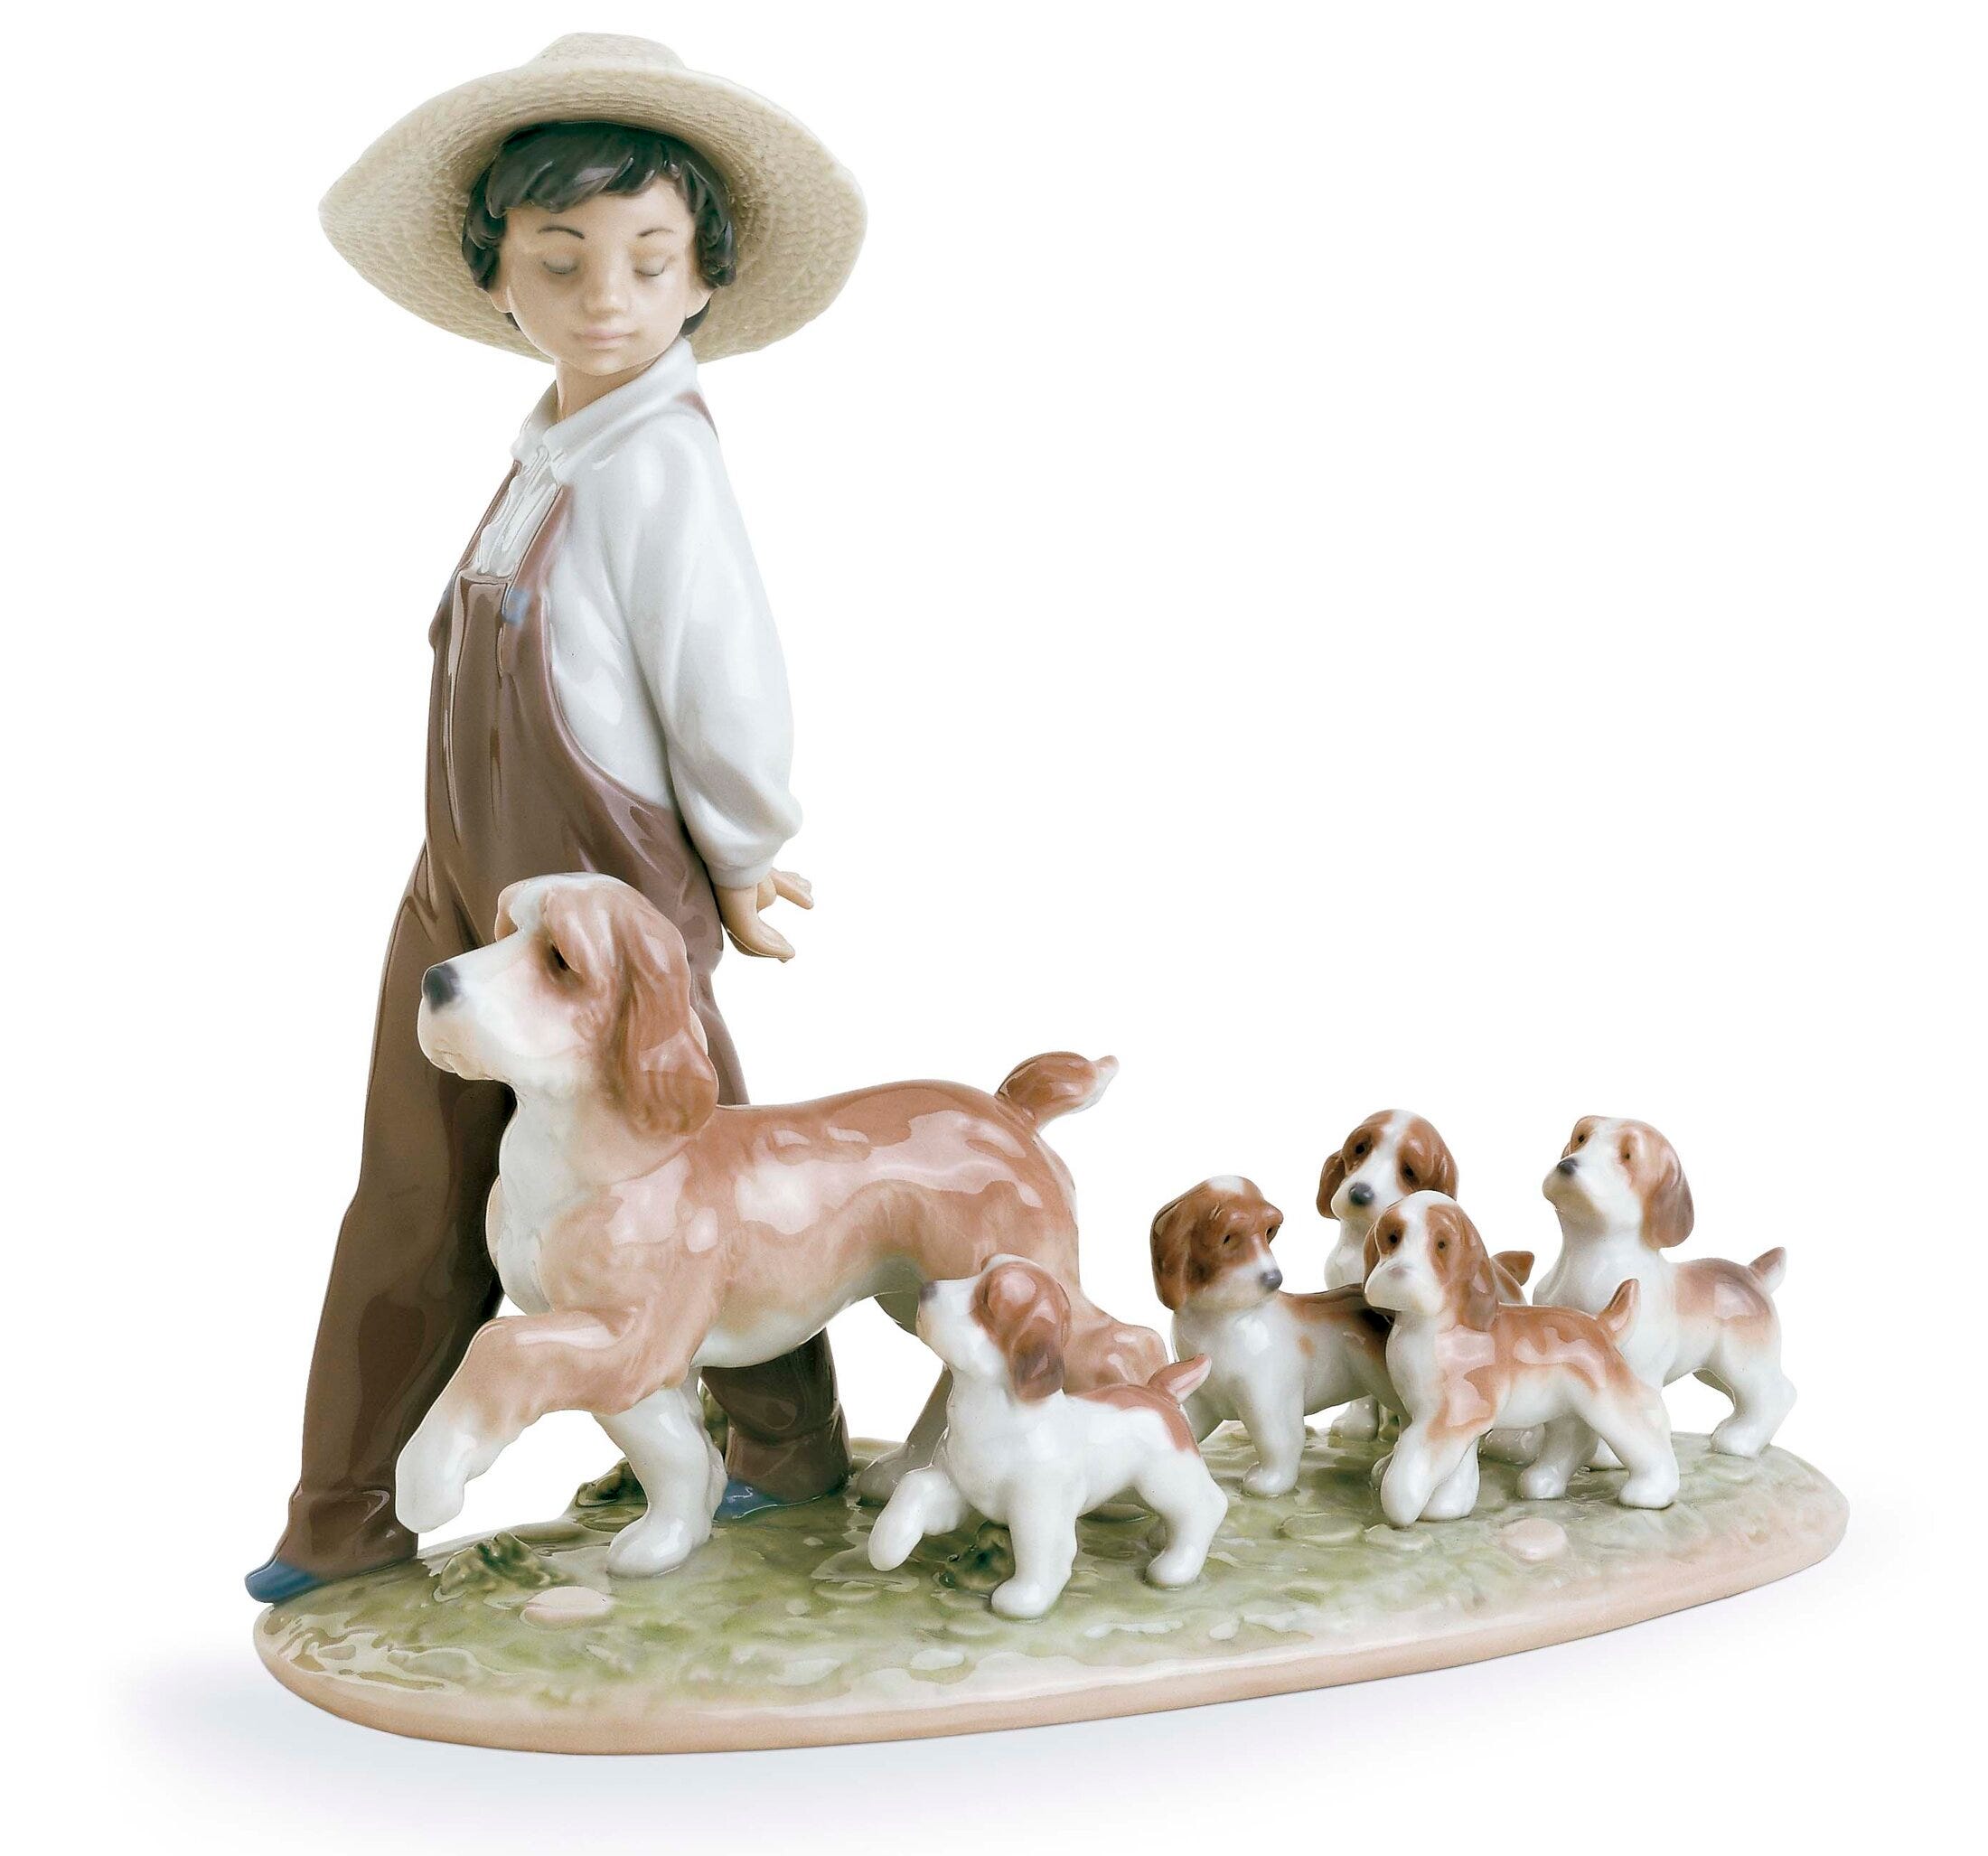 My Little Explorers Boy with Dogs Figurine